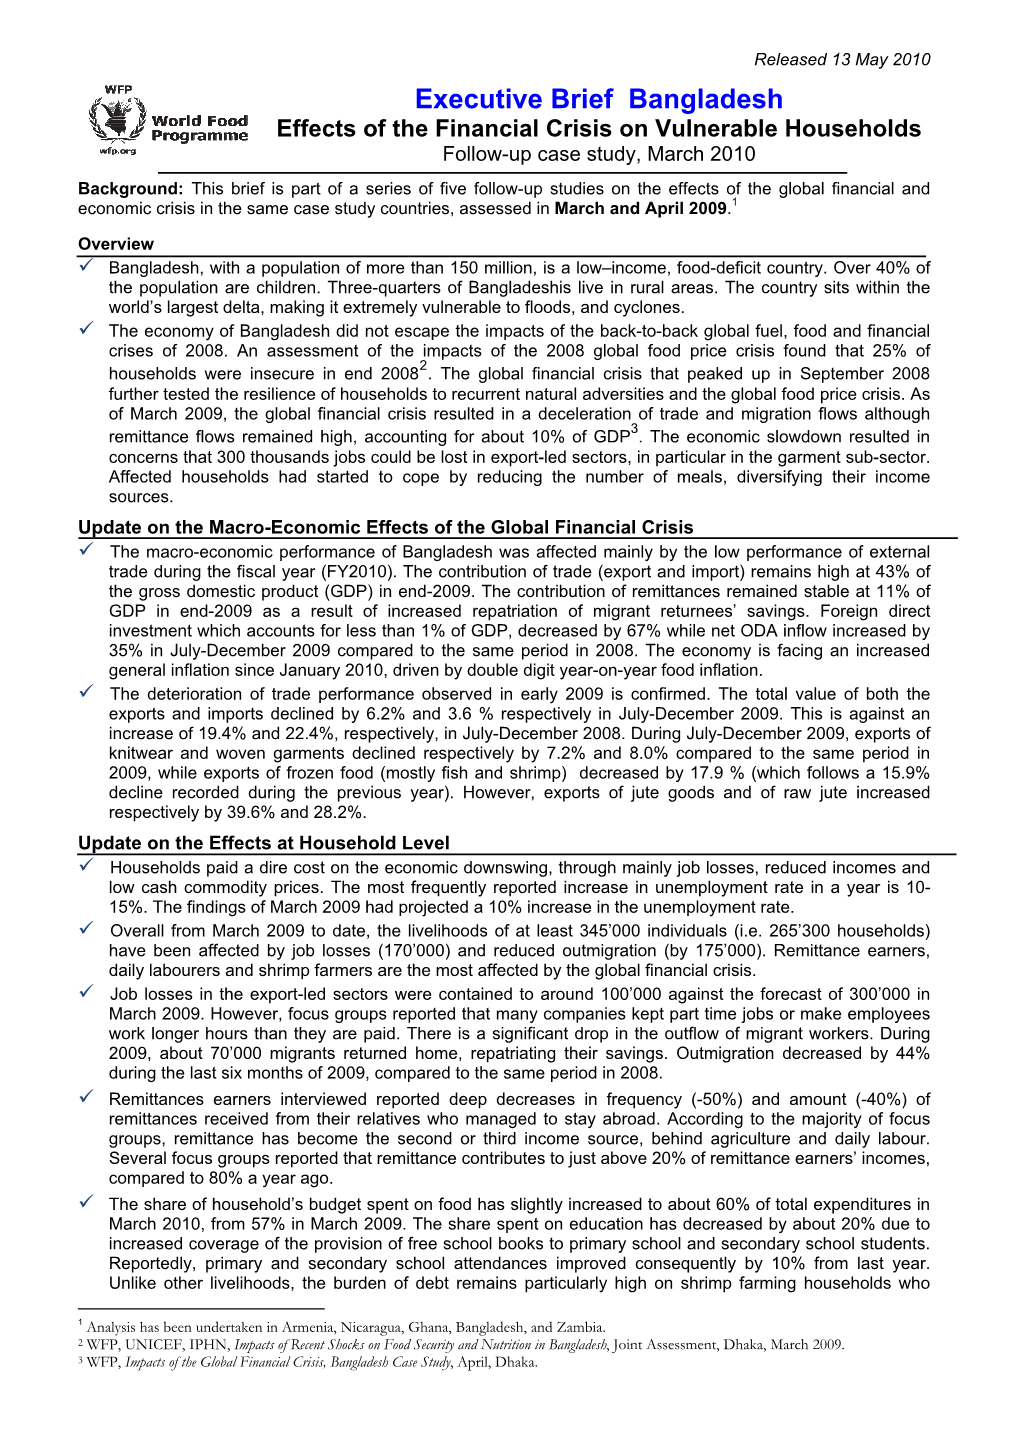 Executive Brief Bangladesh Effects of the Financial Crisis on Vulnerable Households Follow-Up Case Study, March 2010